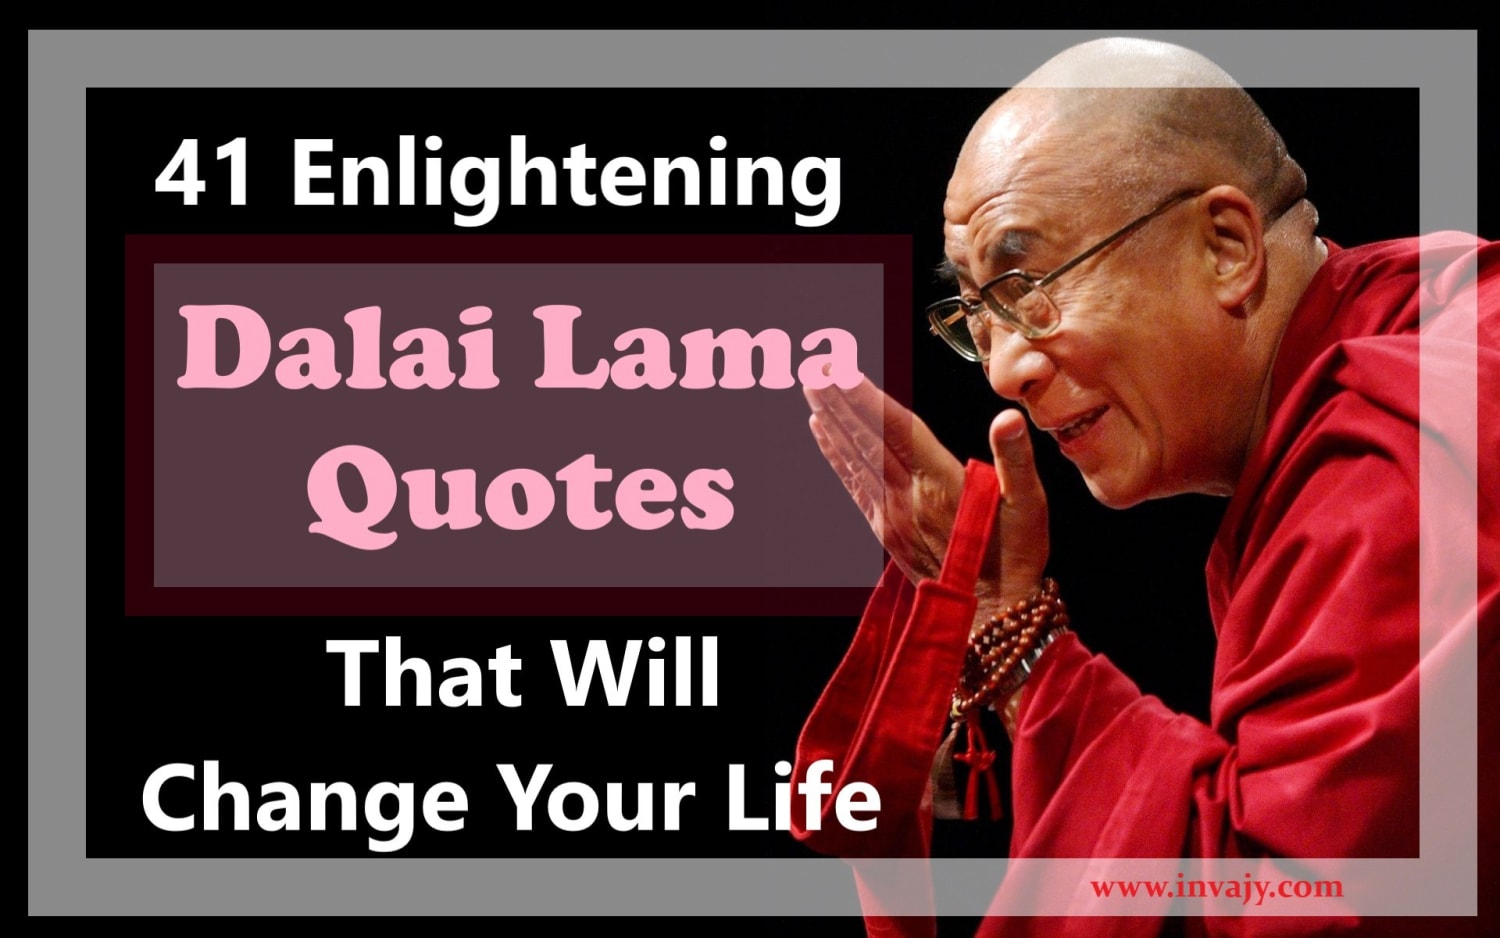 61 Enlightening Dalai Lama Quotes That Will Change Your Life